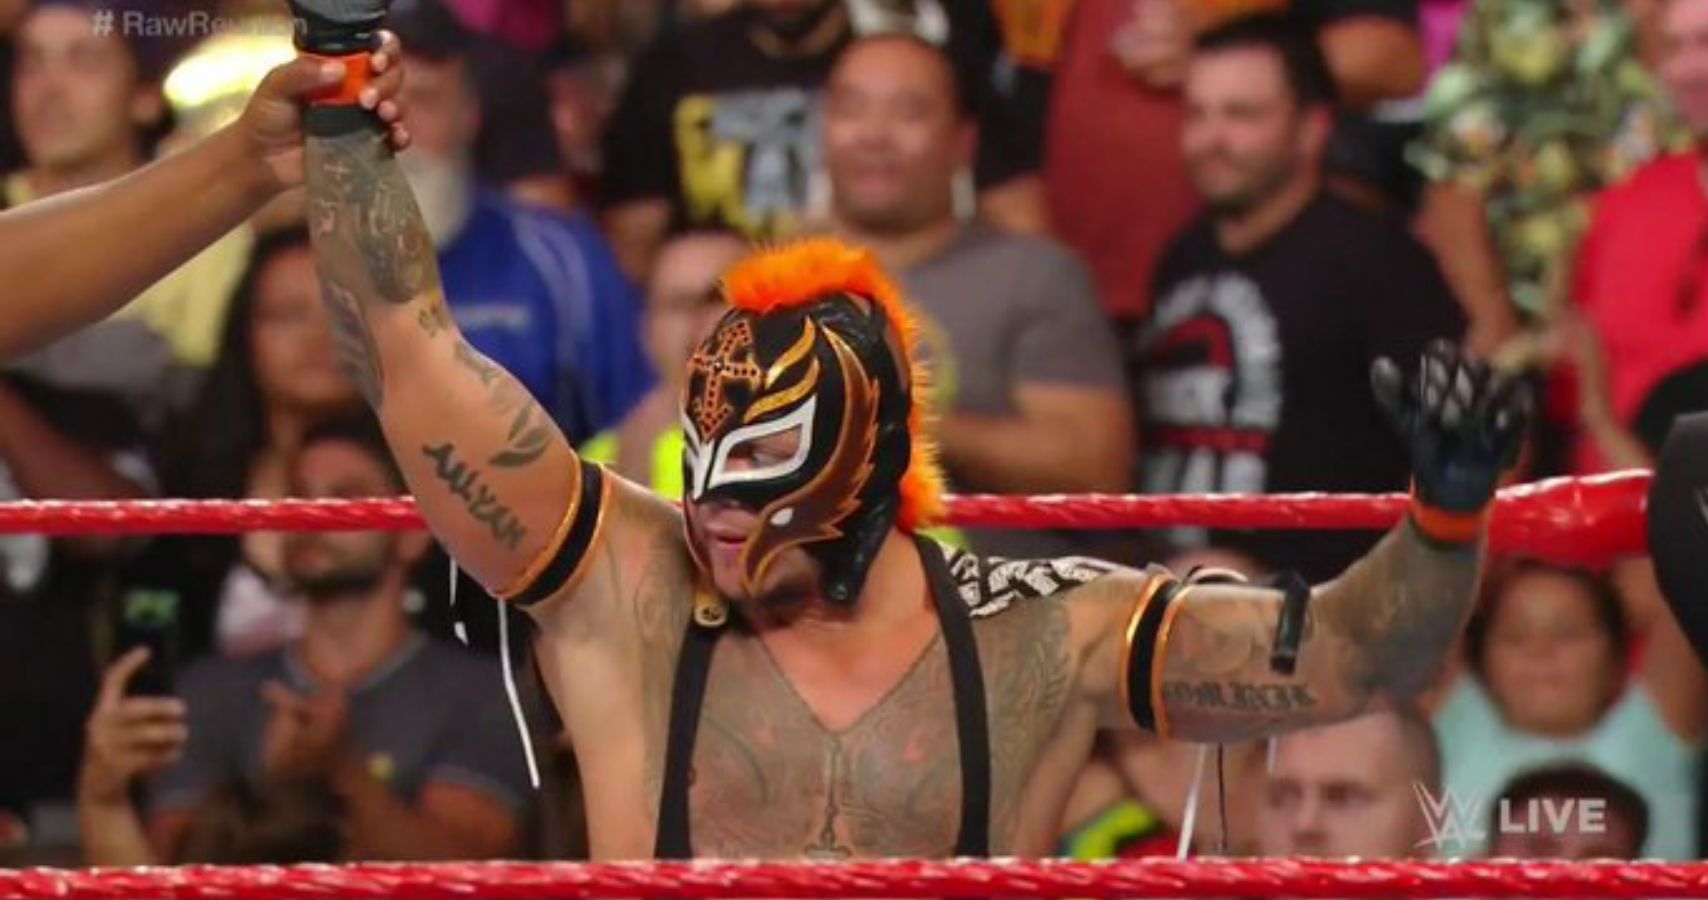 Raw Reunion: Former WWE Champion Shows Up Unannounced To Help Rey Mysterio.